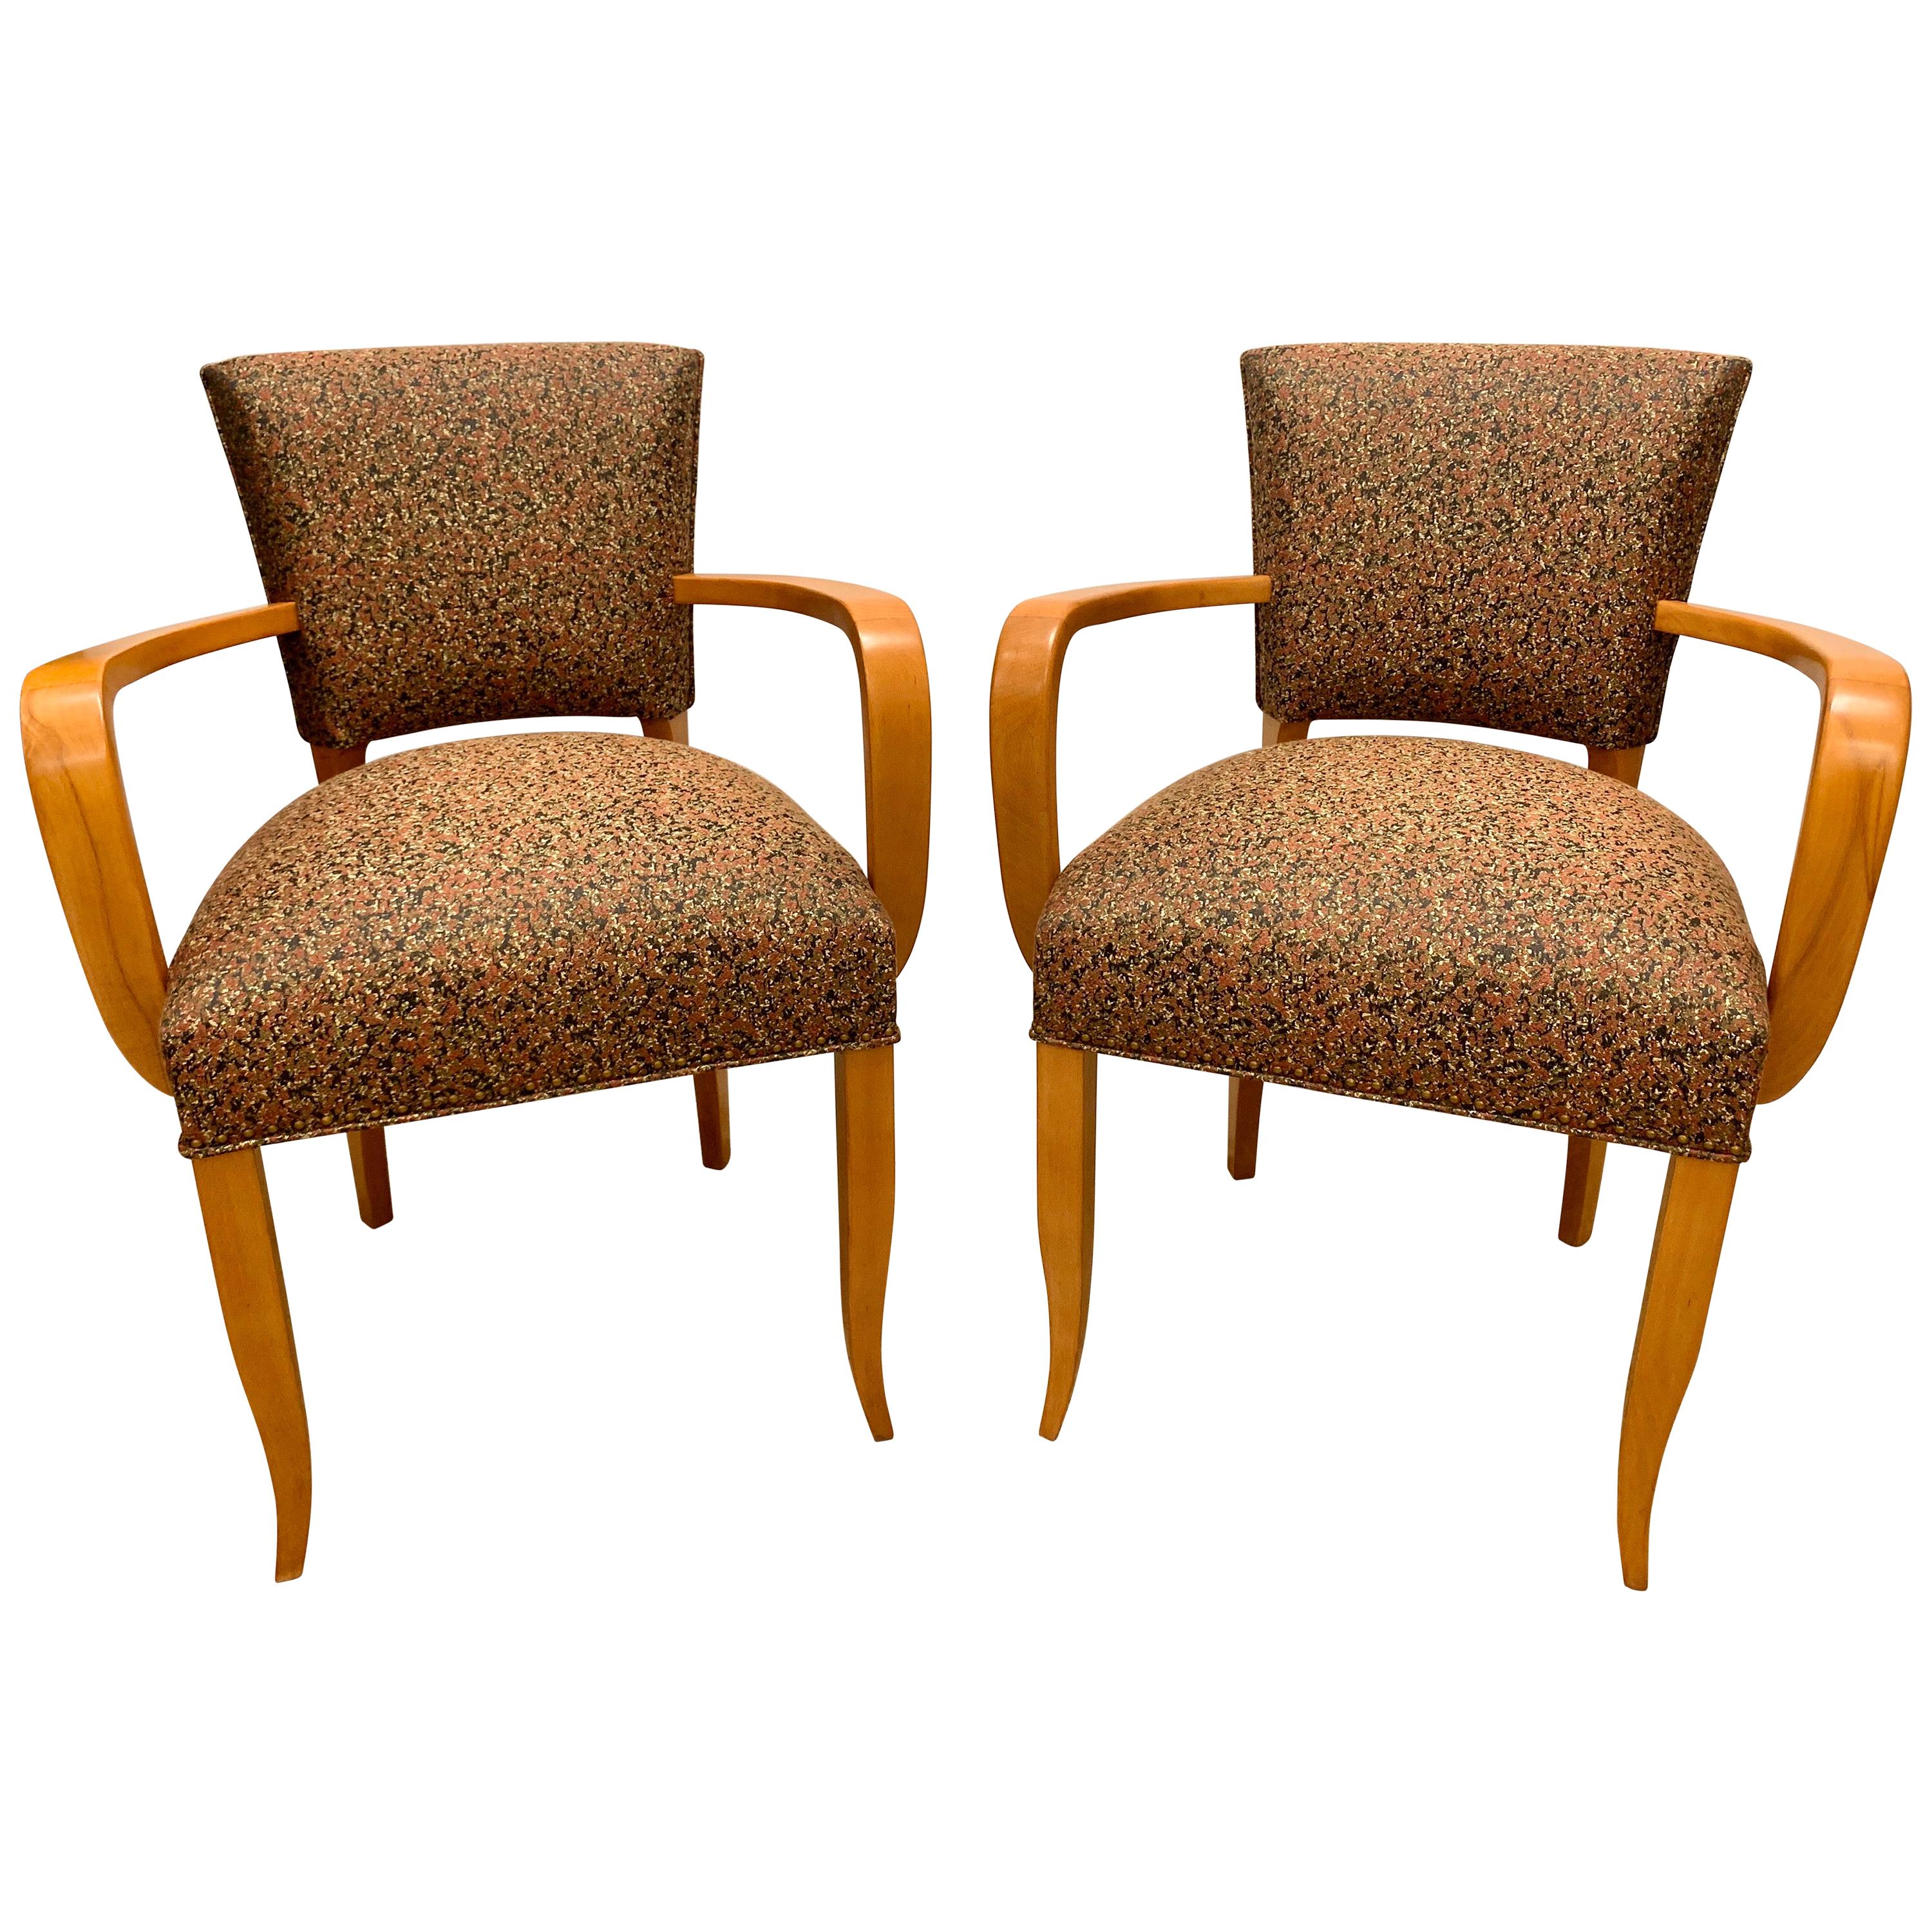 French Deco Bridge/ Side-Chairs with Arms, Pair For Sale at 1stDibs